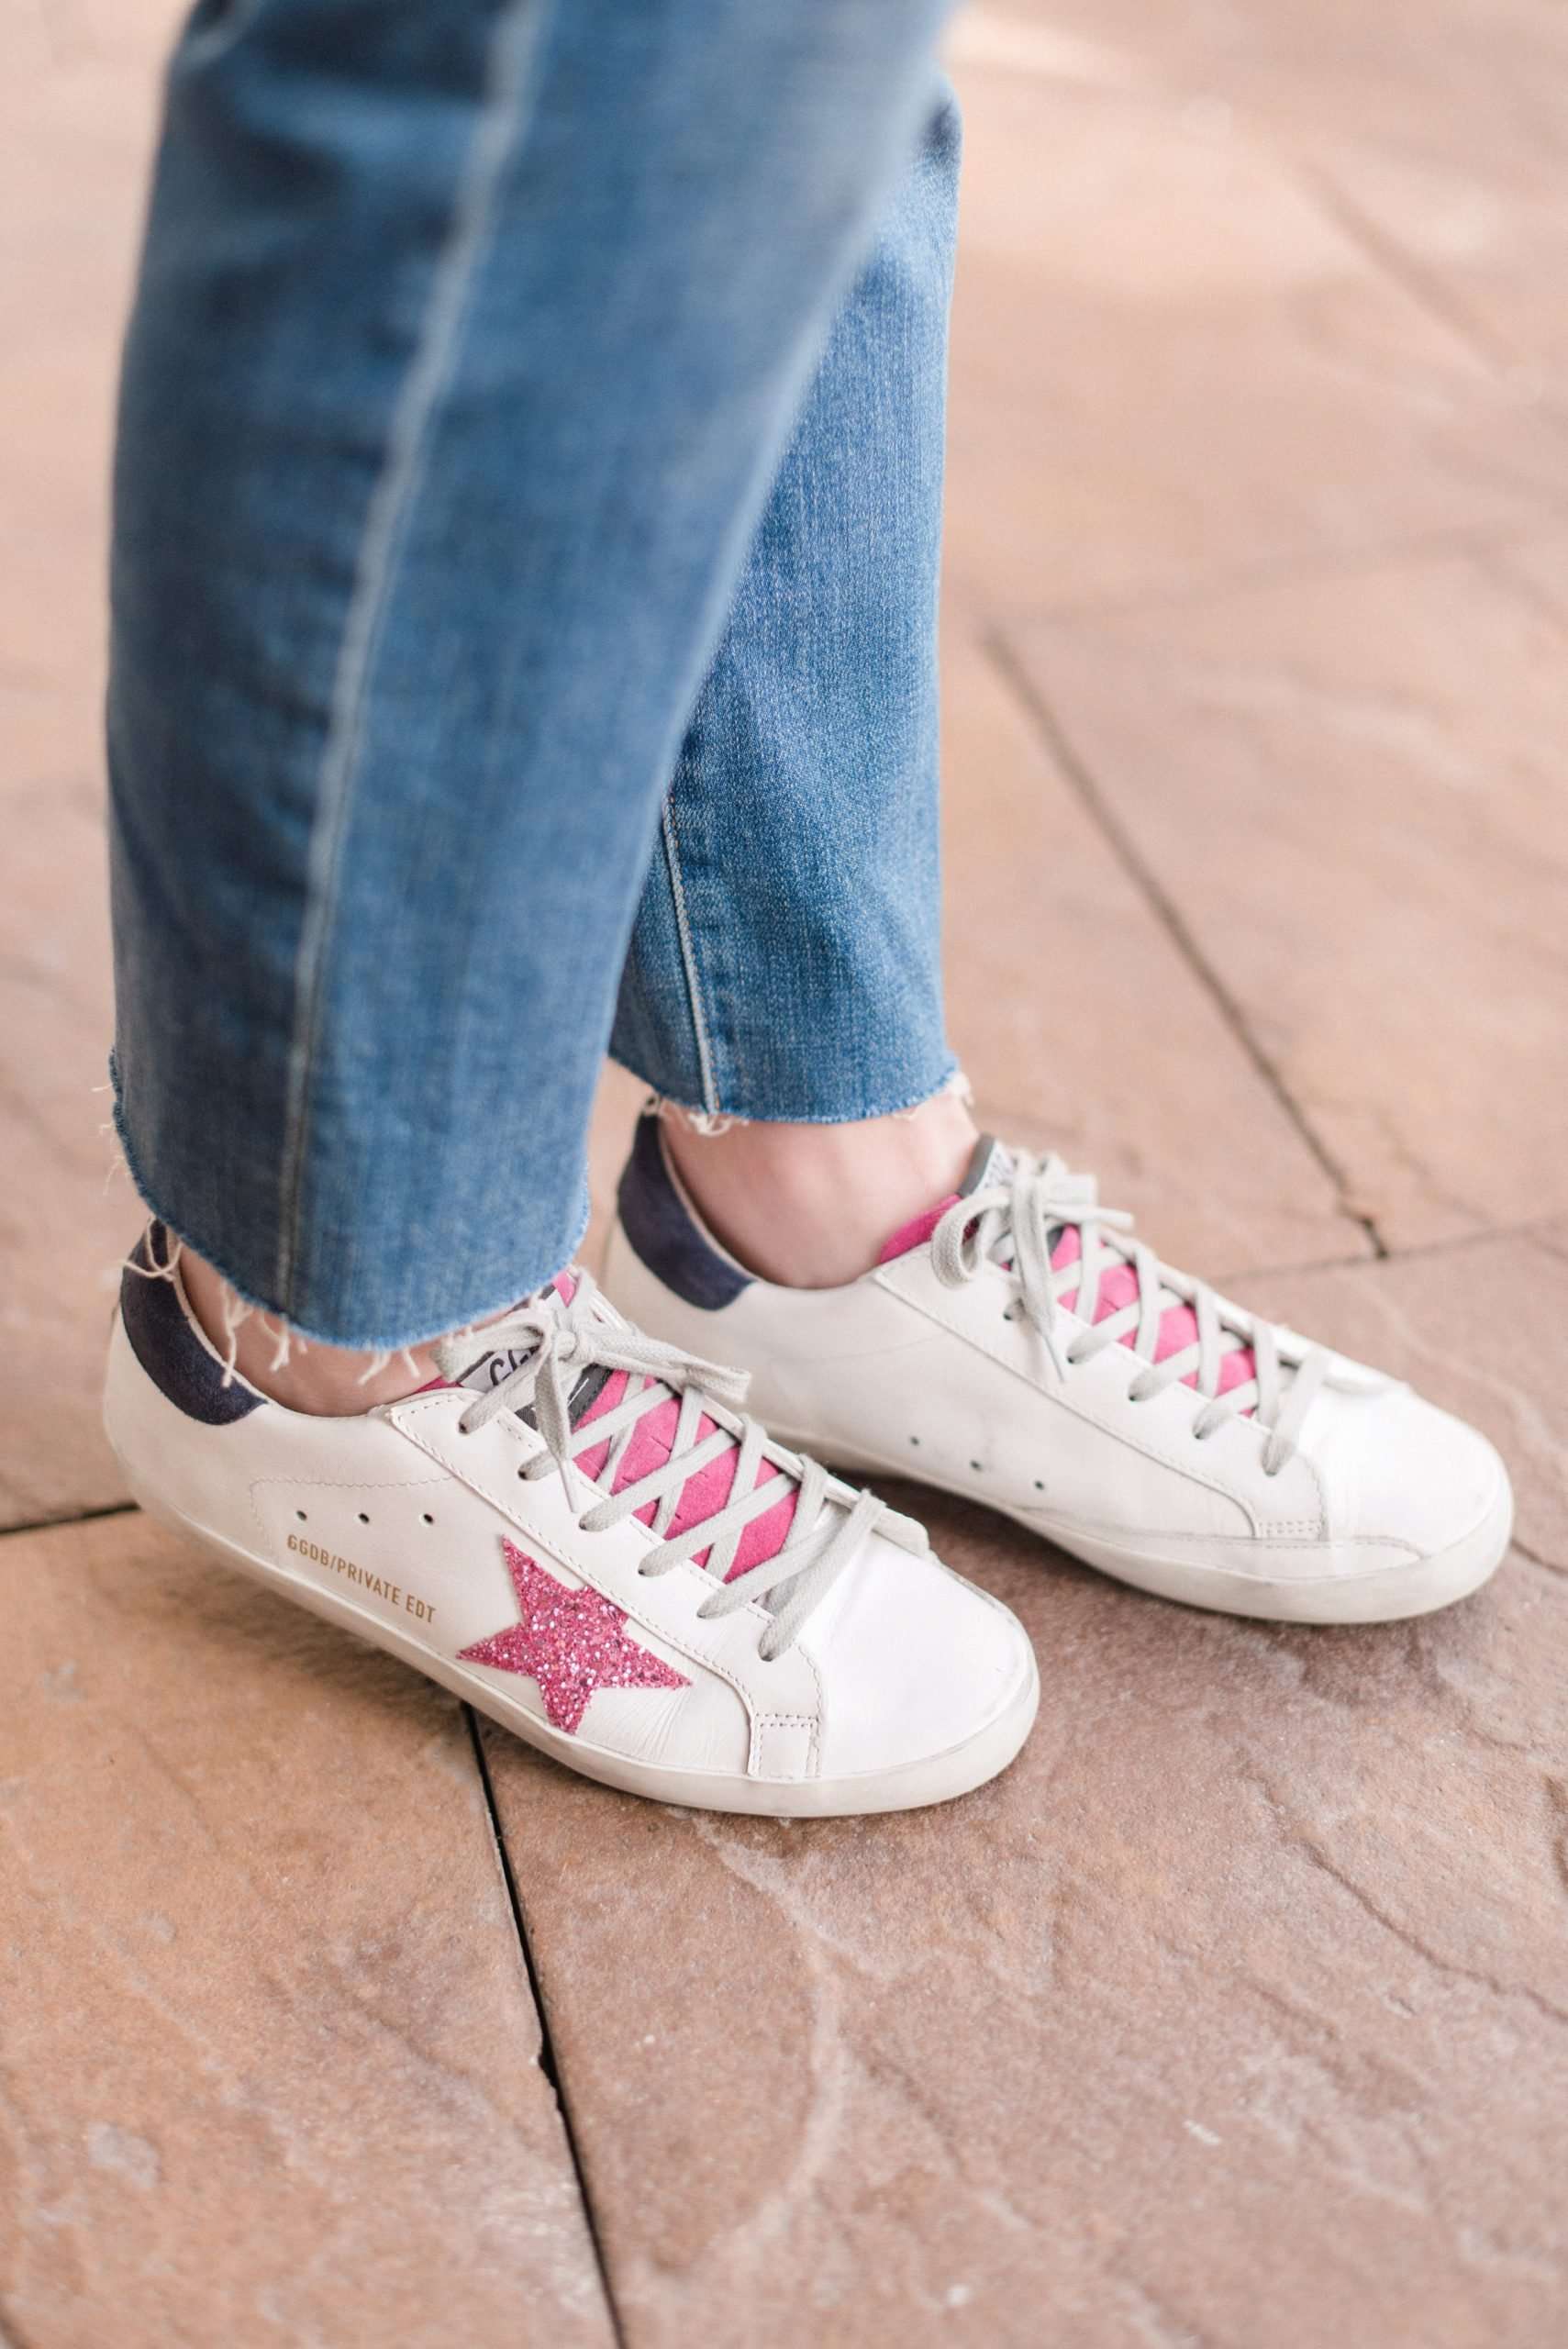 Golden Goose Sneakers: Sizing, Selections, Dupes